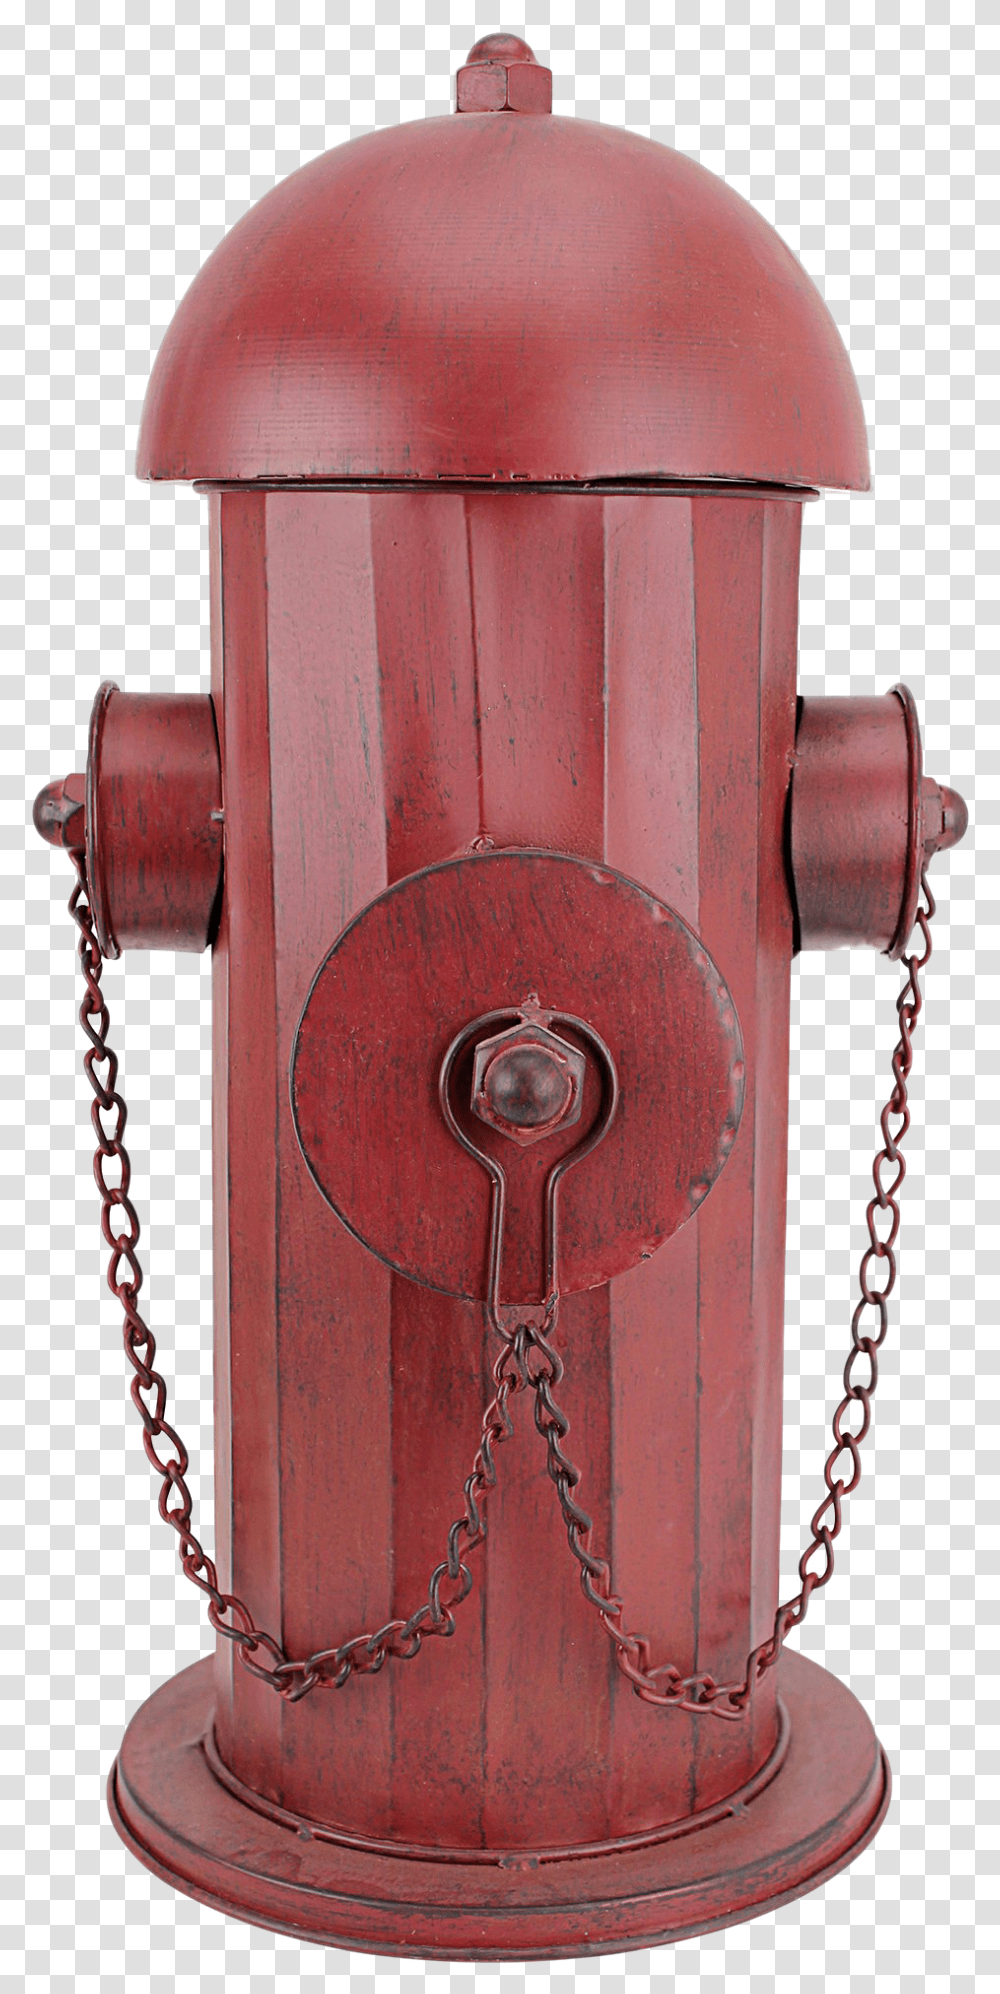 Red Fire Hydrant Free Machine, Mailbox, Letterbox, Rust, Gas Pump Transparent Png